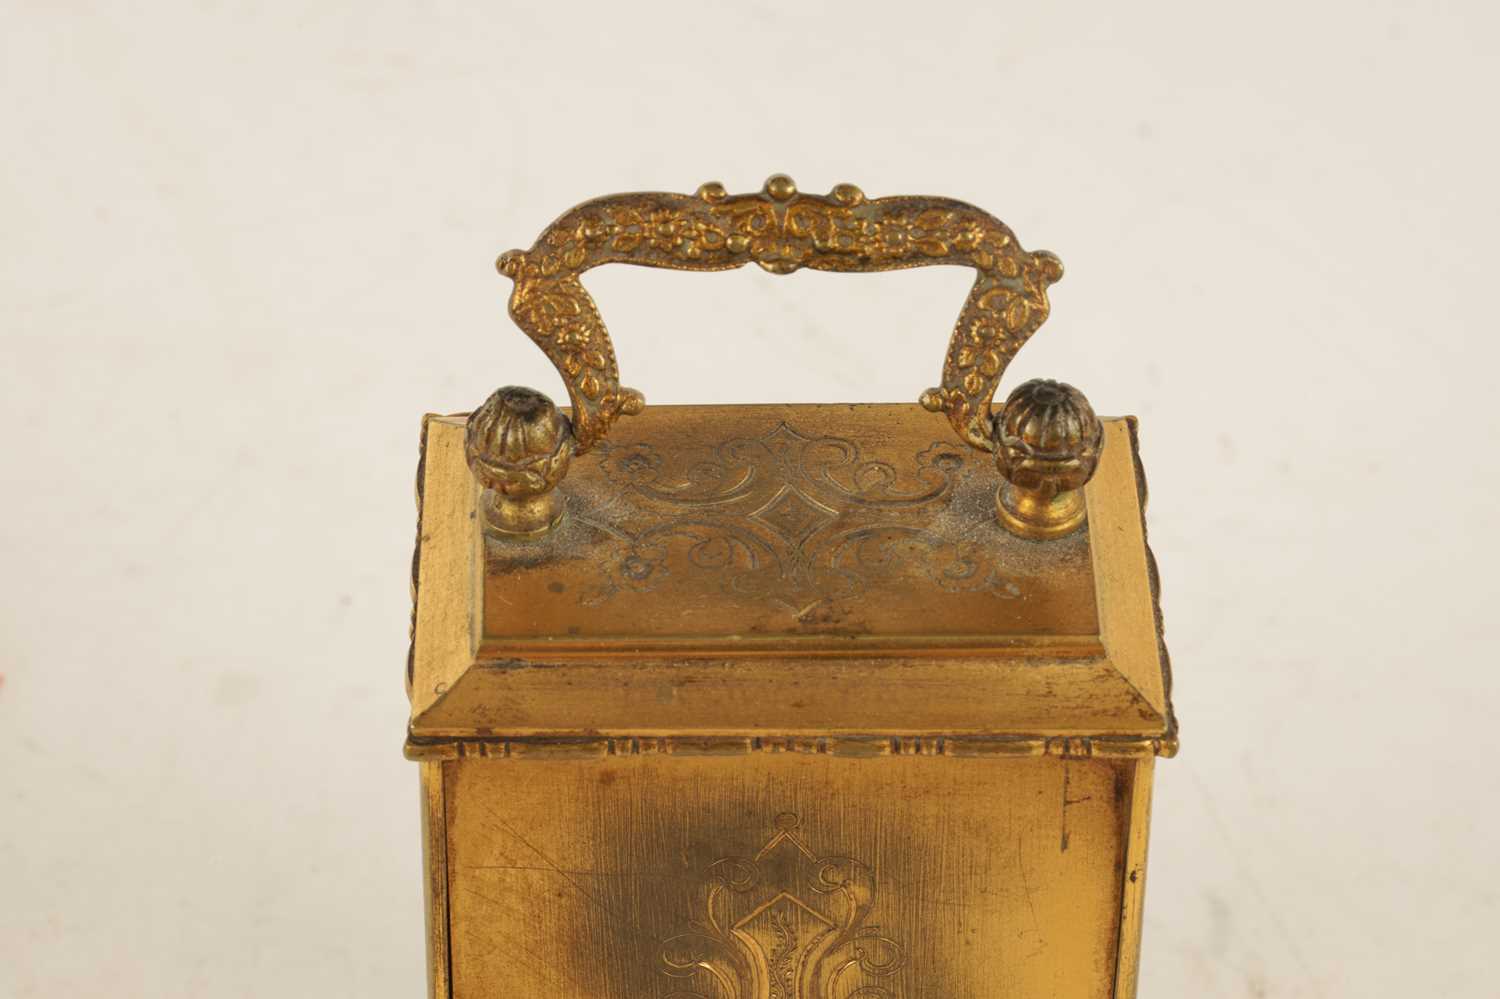 A MID 19TH CENTURY FRENCH GILT ENGRAVED CASED FUSEE CARRIAGE CLOCK - Image 7 of 7